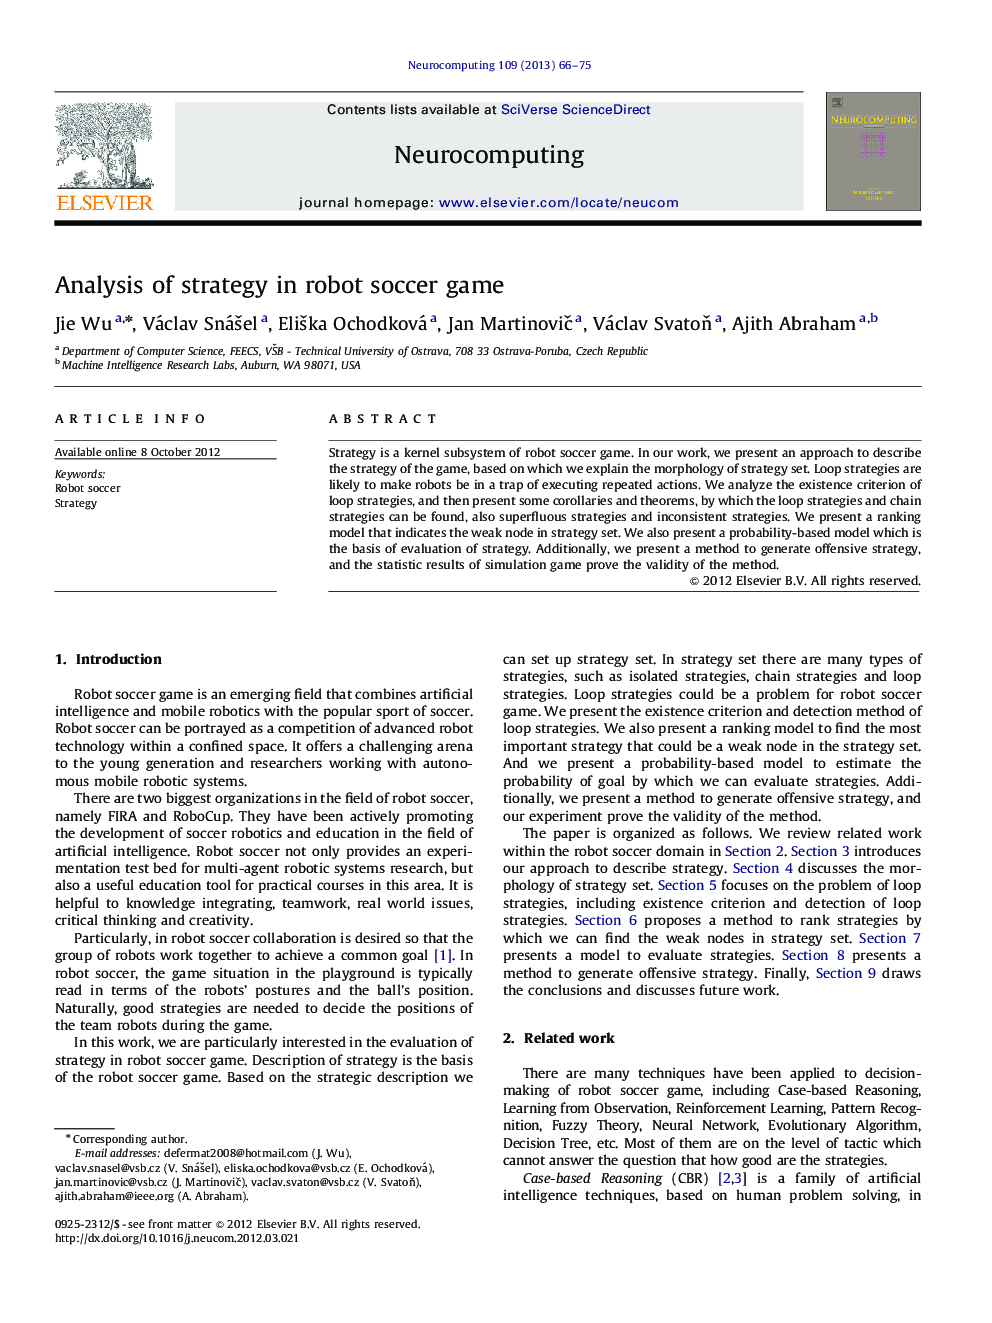 Analysis of strategy in robot soccer game